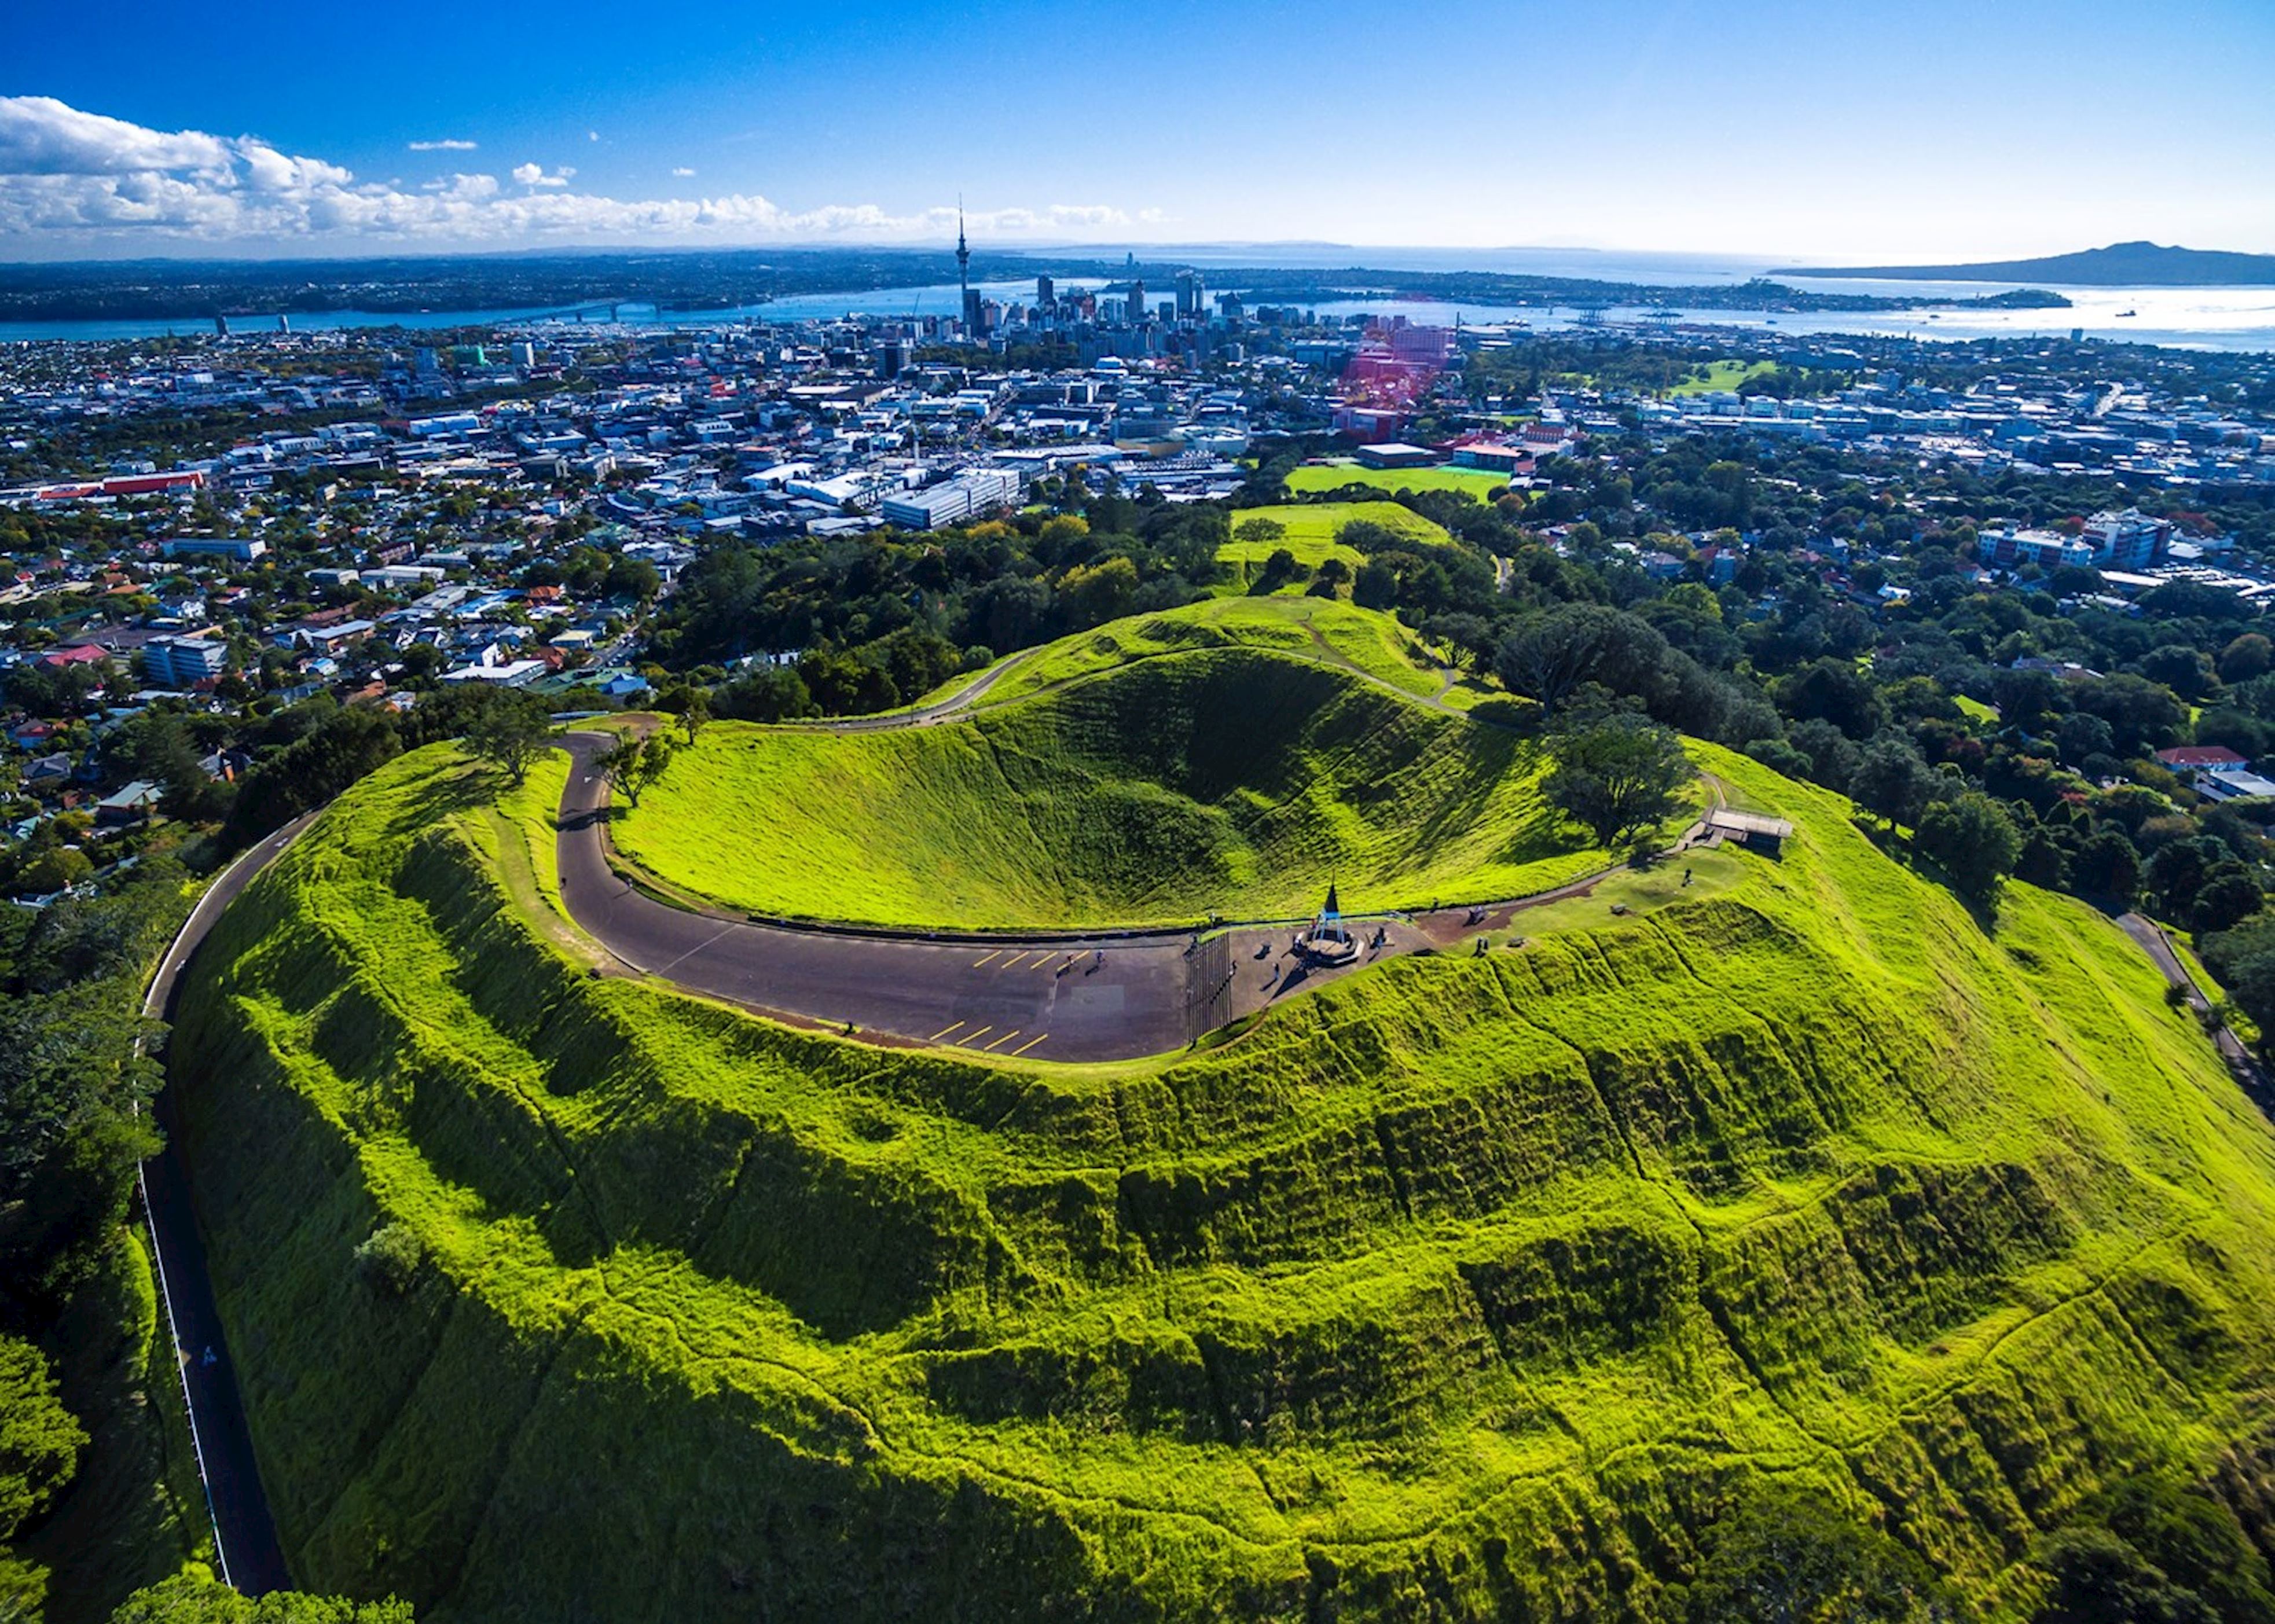 places to visit near auckland